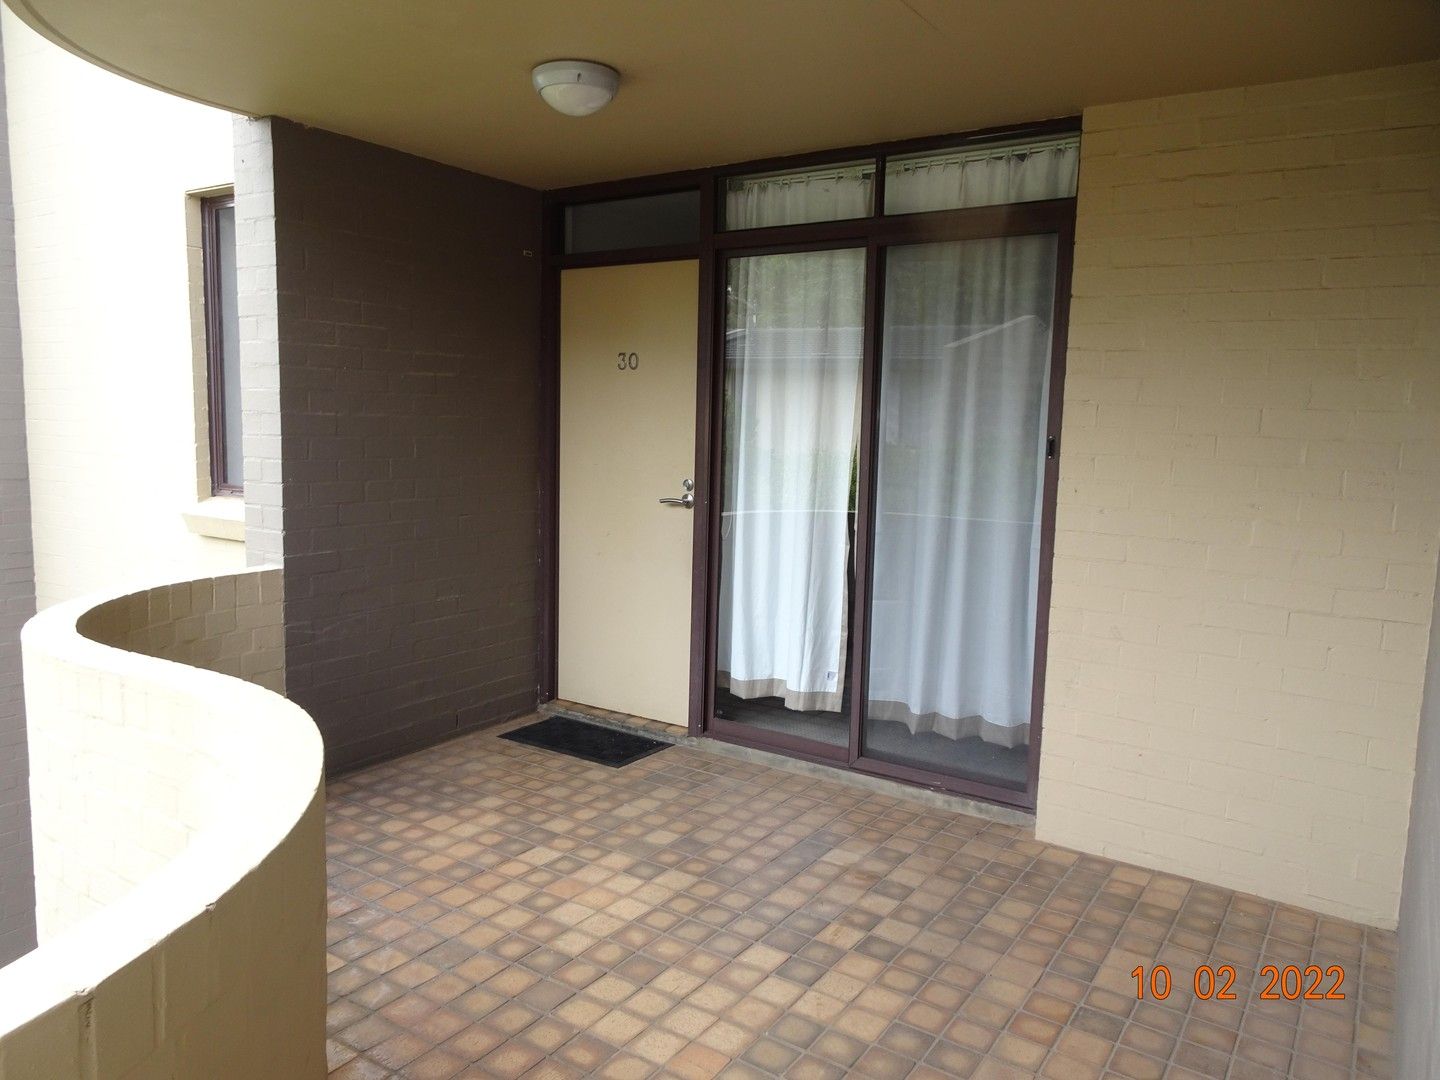 2 bedrooms Apartment / Unit / Flat in 30/1 Oxley Street GRIFFITH ACT, 2603